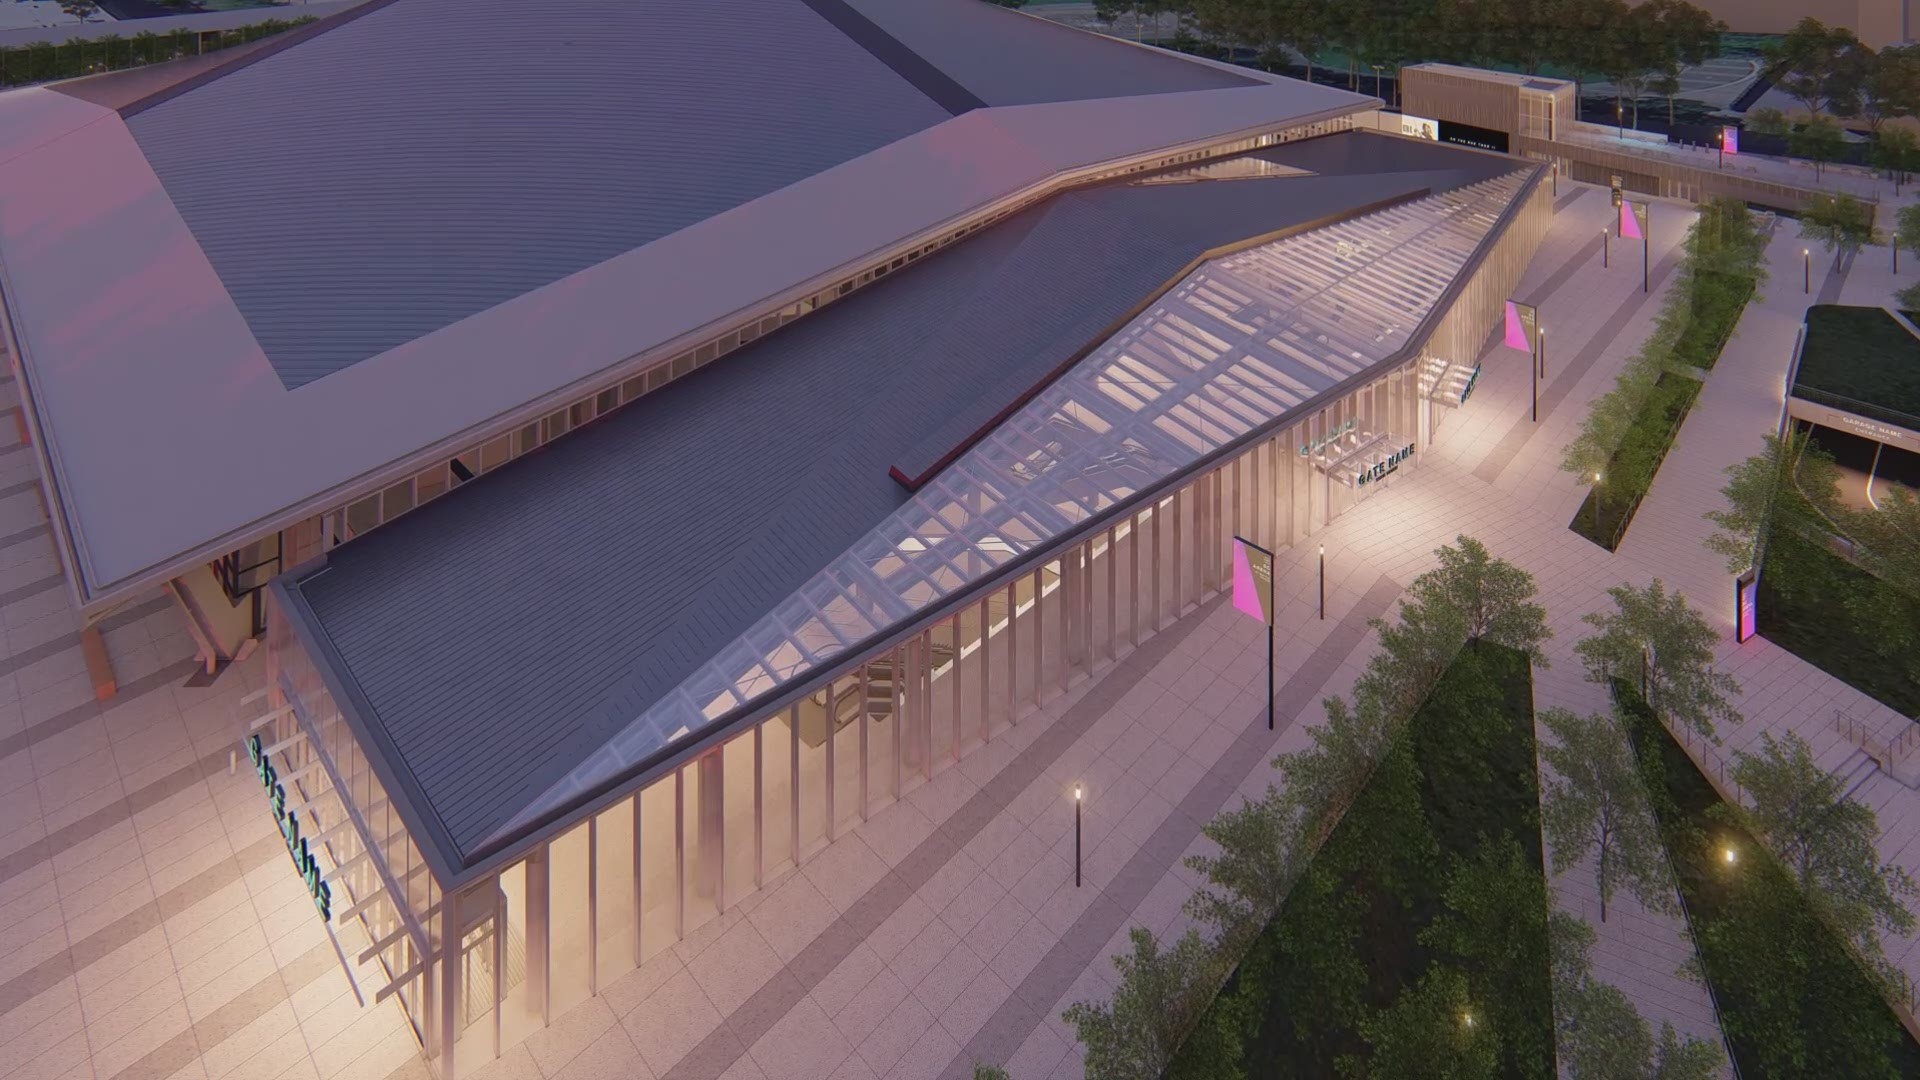 Renderings of the New Arena at Seattle Center. Credit: Oak View Group